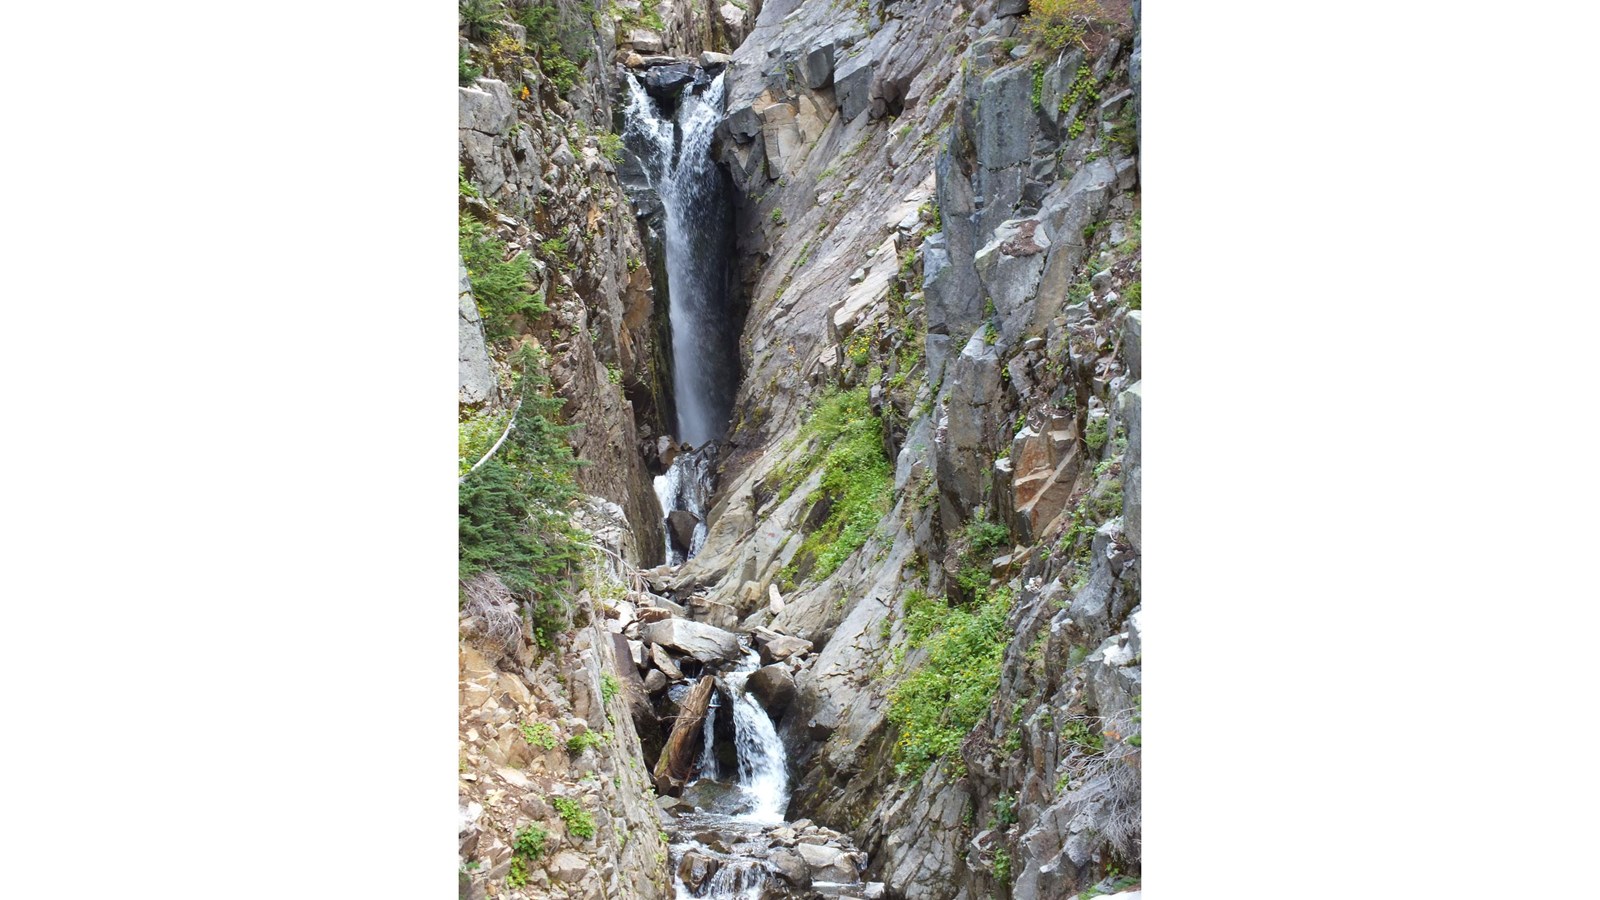 Waterfall in narrow gorge with several cascades